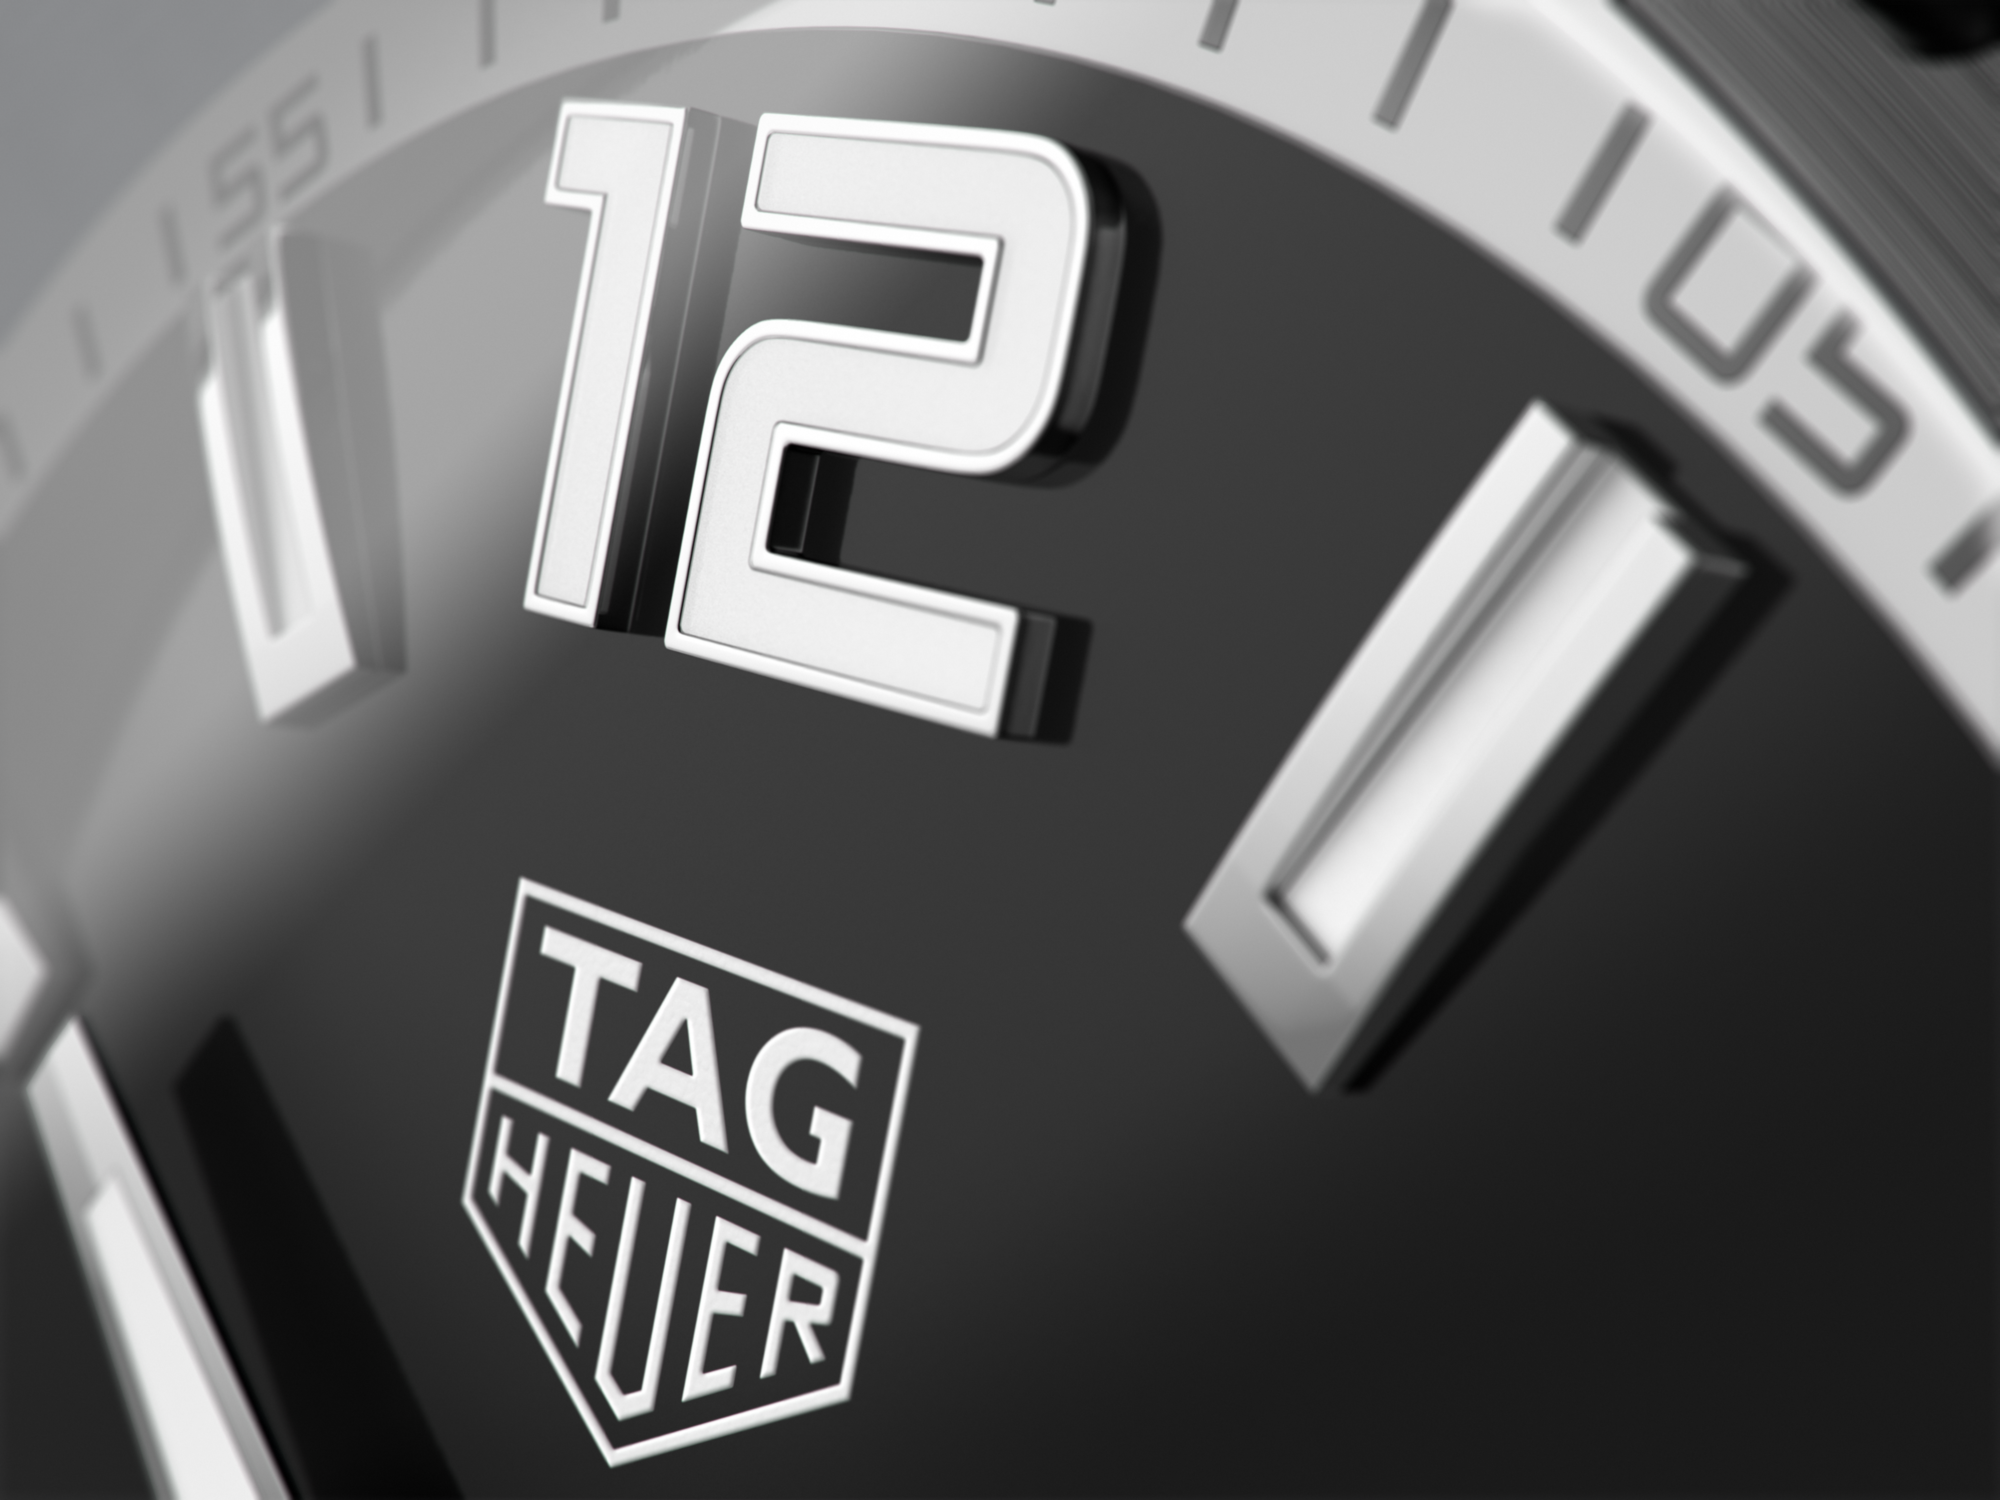 TAG Heuer TAG HEUER SLR Calibre S Mercedes-Benz CAG7010. FT6013 Black Dial New Watch Men's Watches